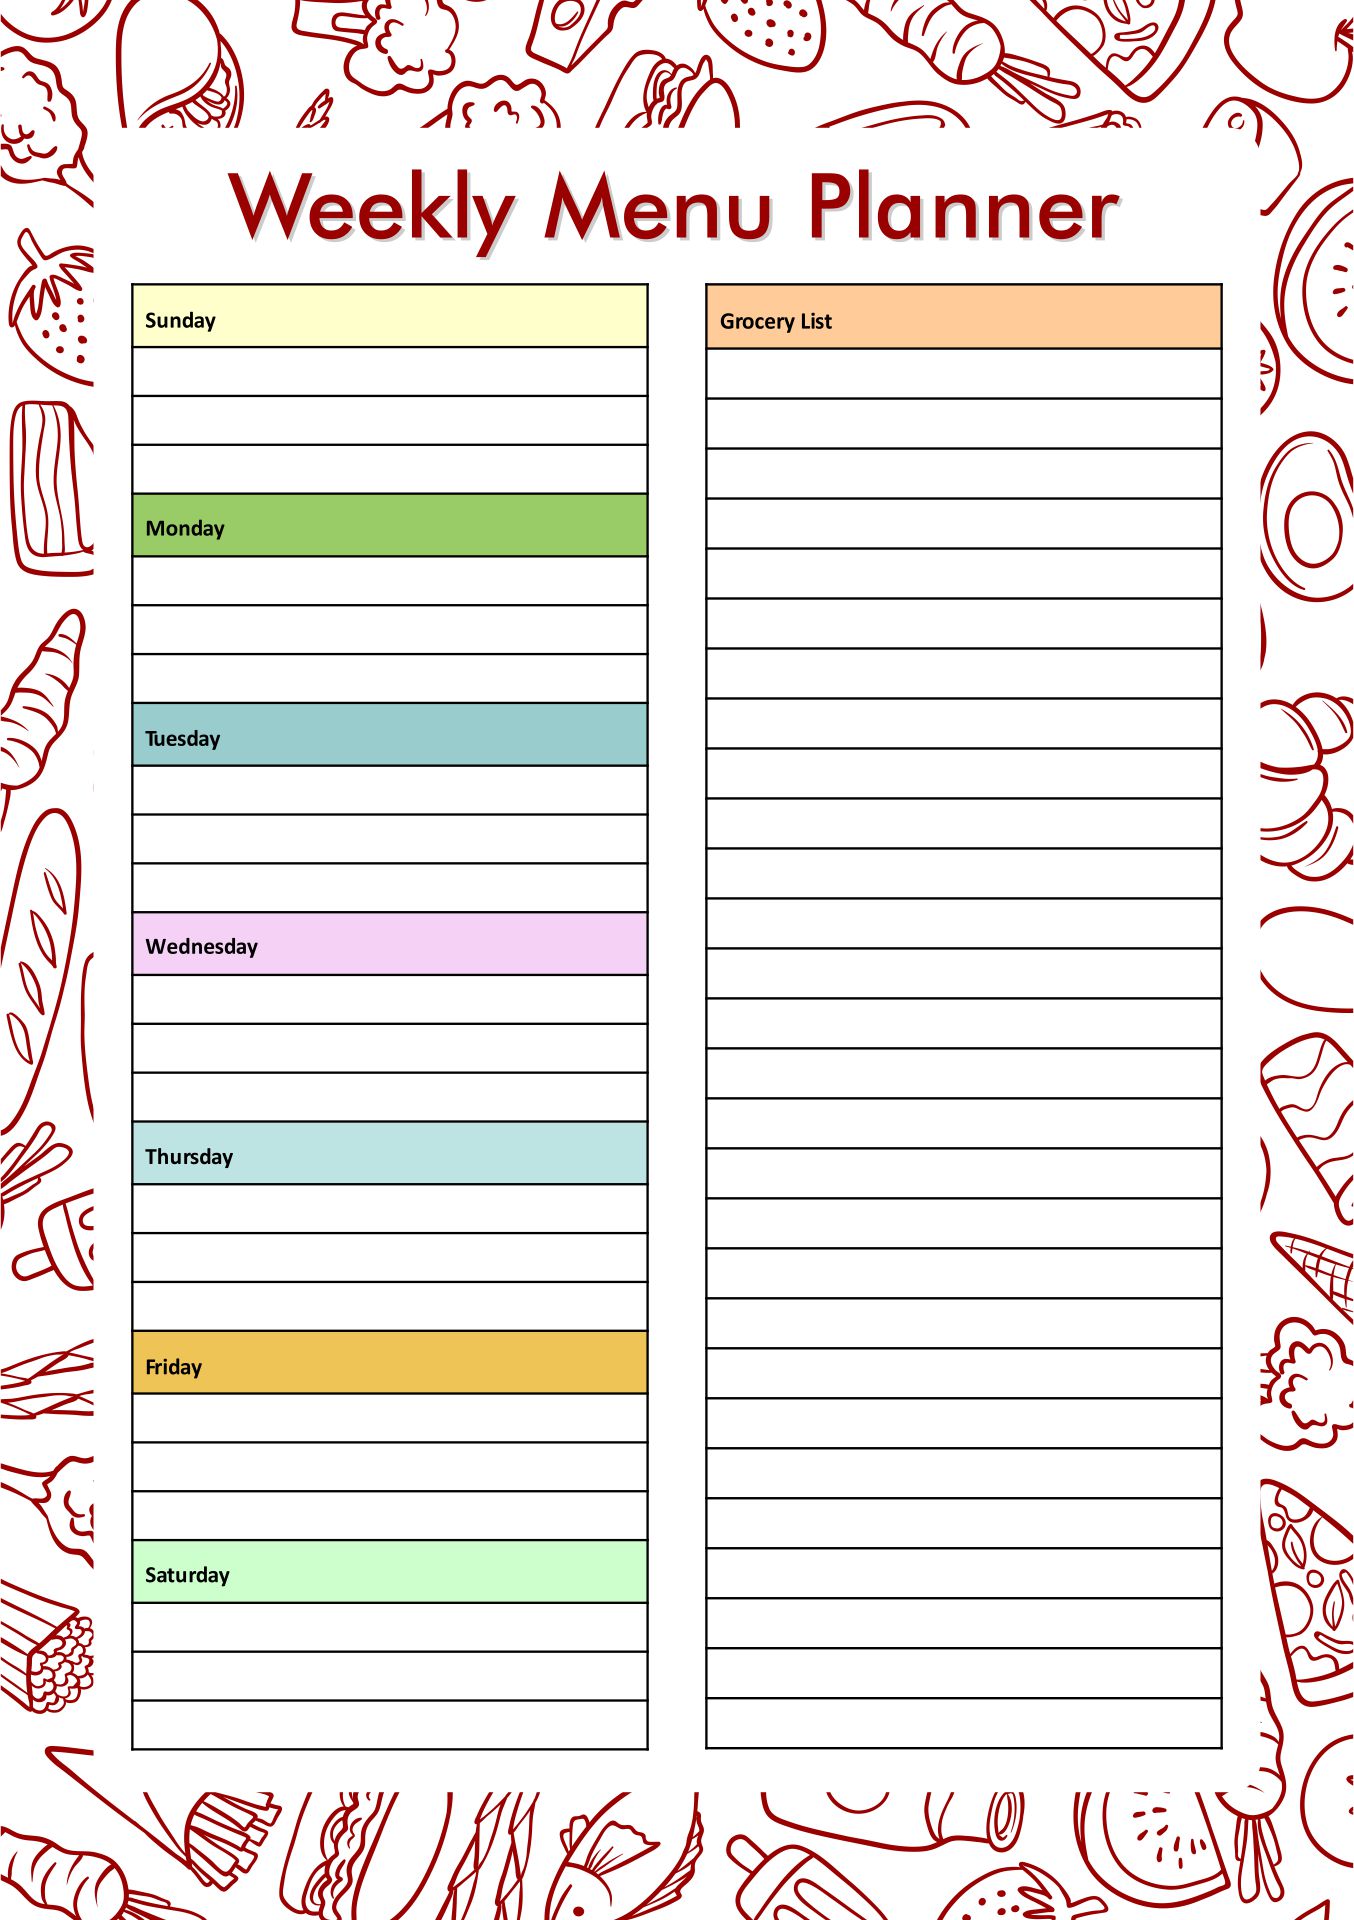 6-best-images-of-free-printable-meal-planner-calorie-charts-low-carb-diet-meal-plan-1200